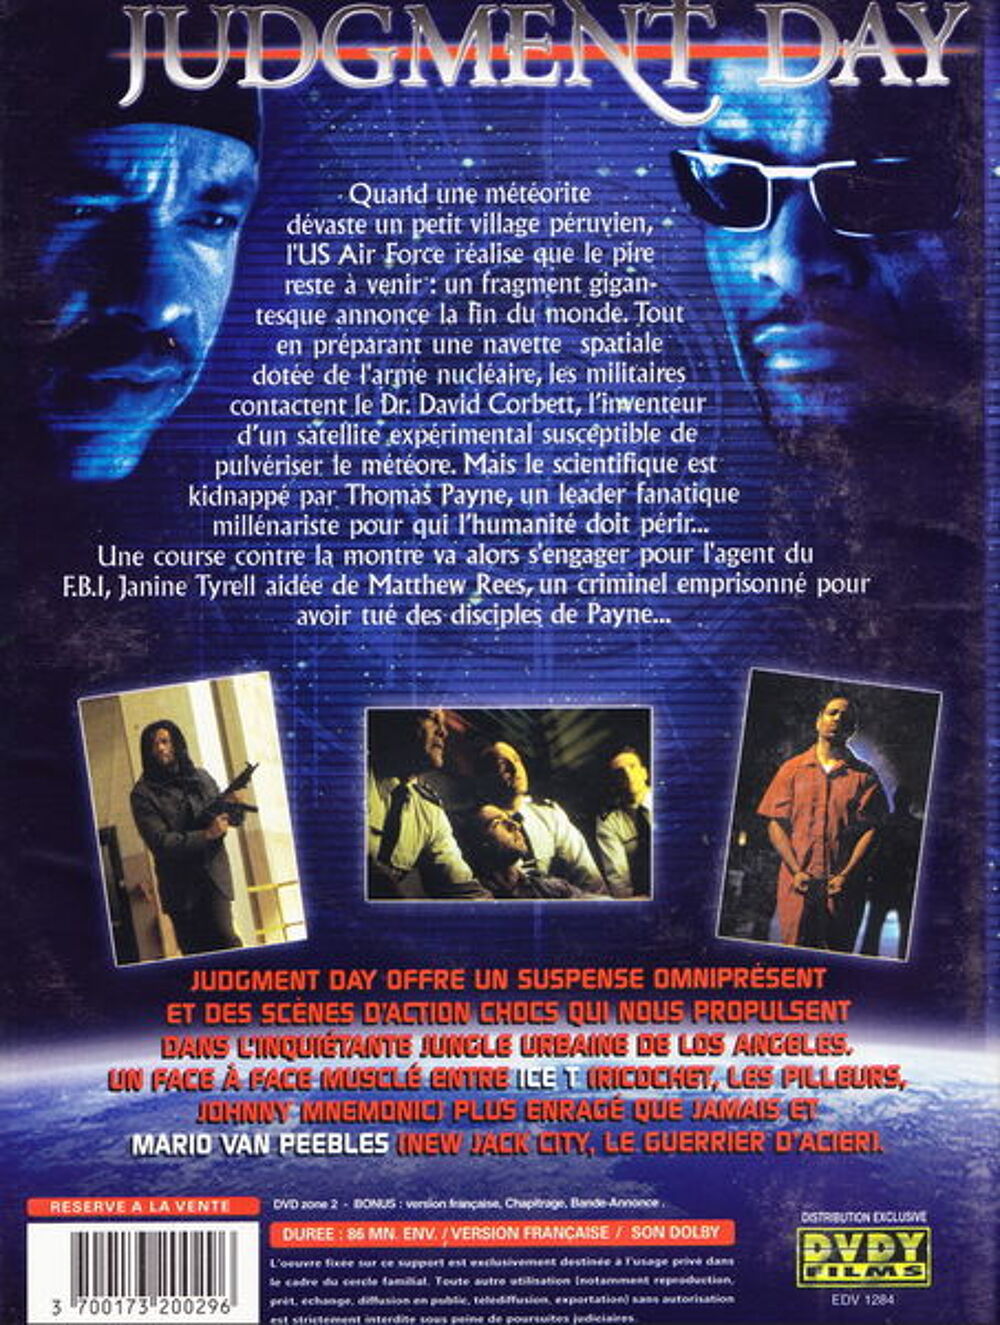 DVD Judgment day
DVD et blu-ray